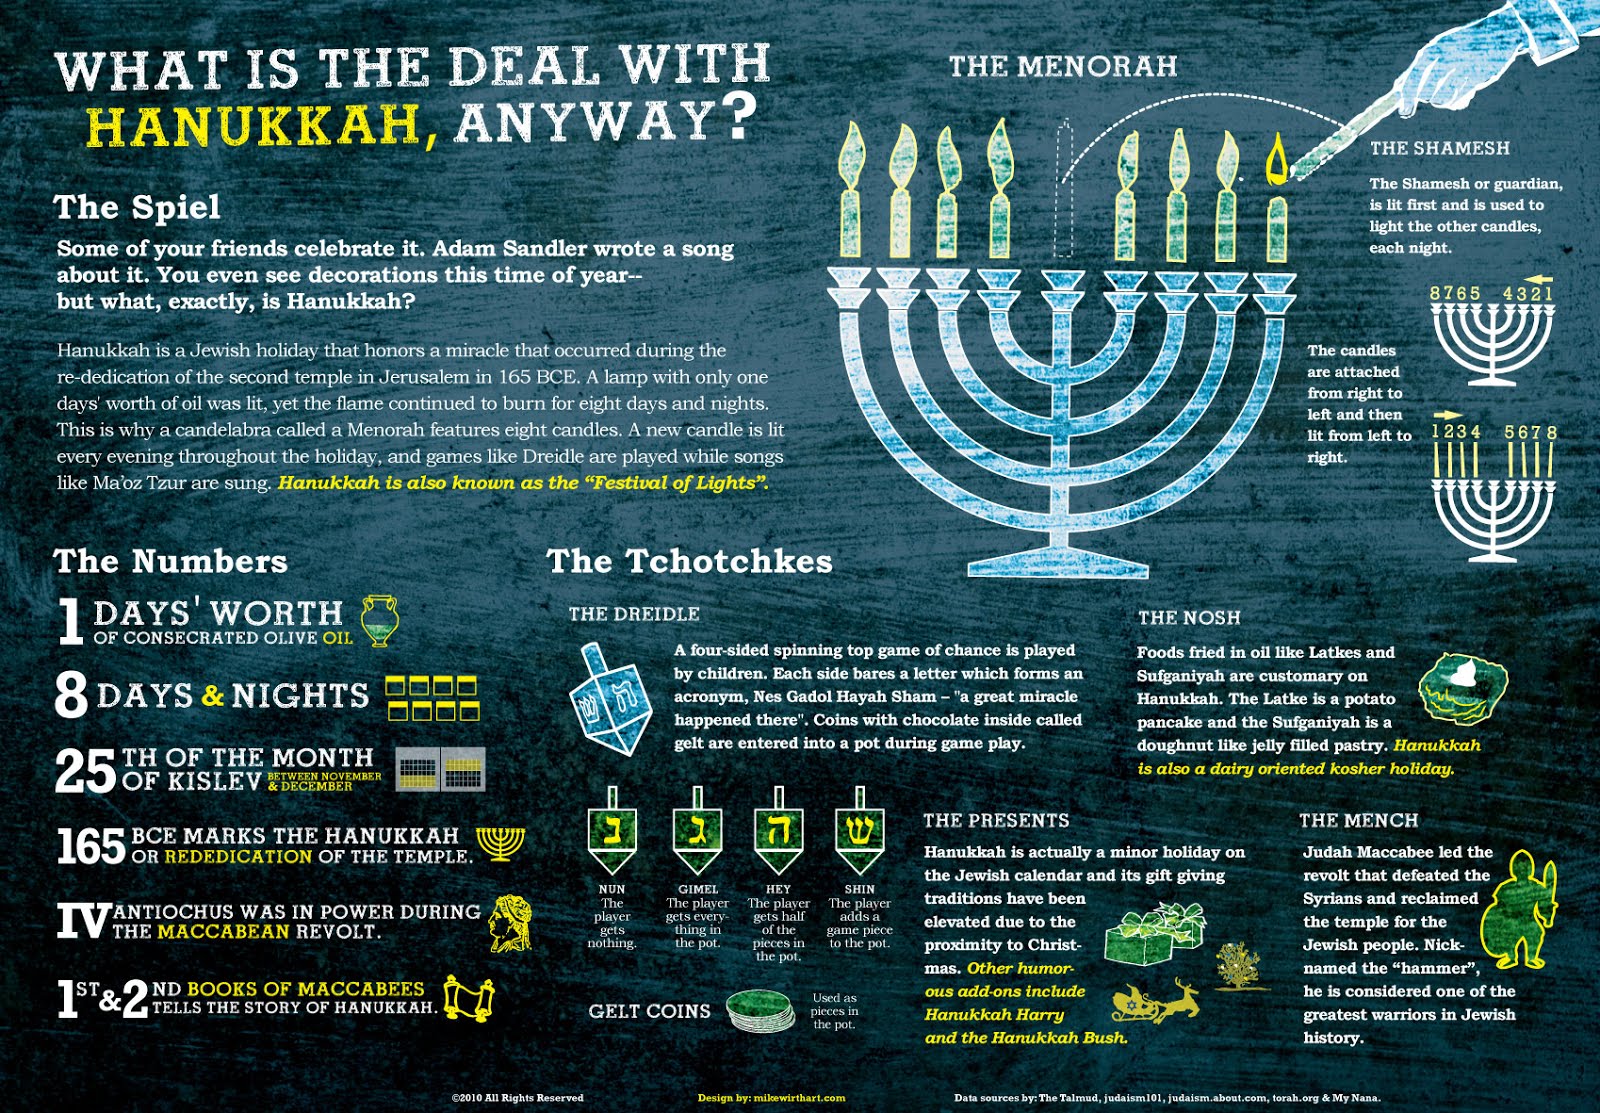 What is Hanukkah? Why the different spellings?